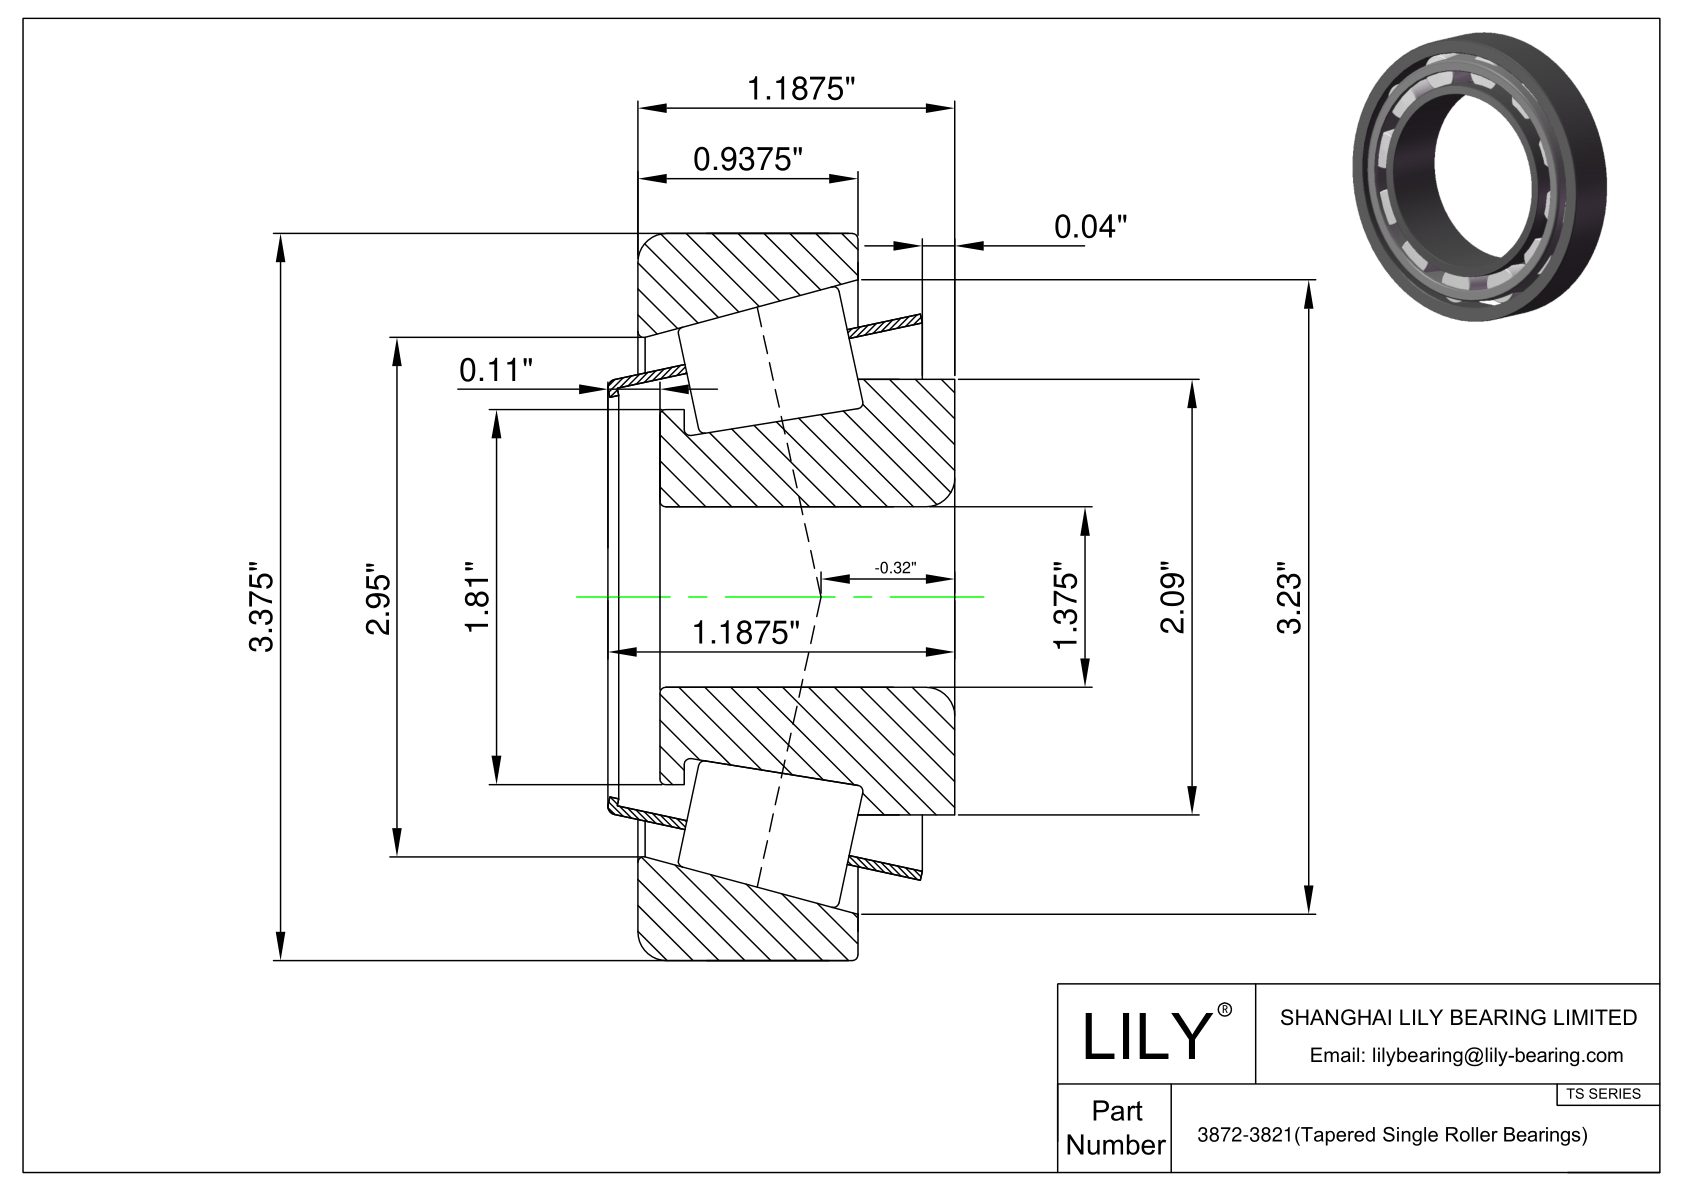 3872-3821 TS (Tapered Single Roller Bearings) (Imperial) cad drawing